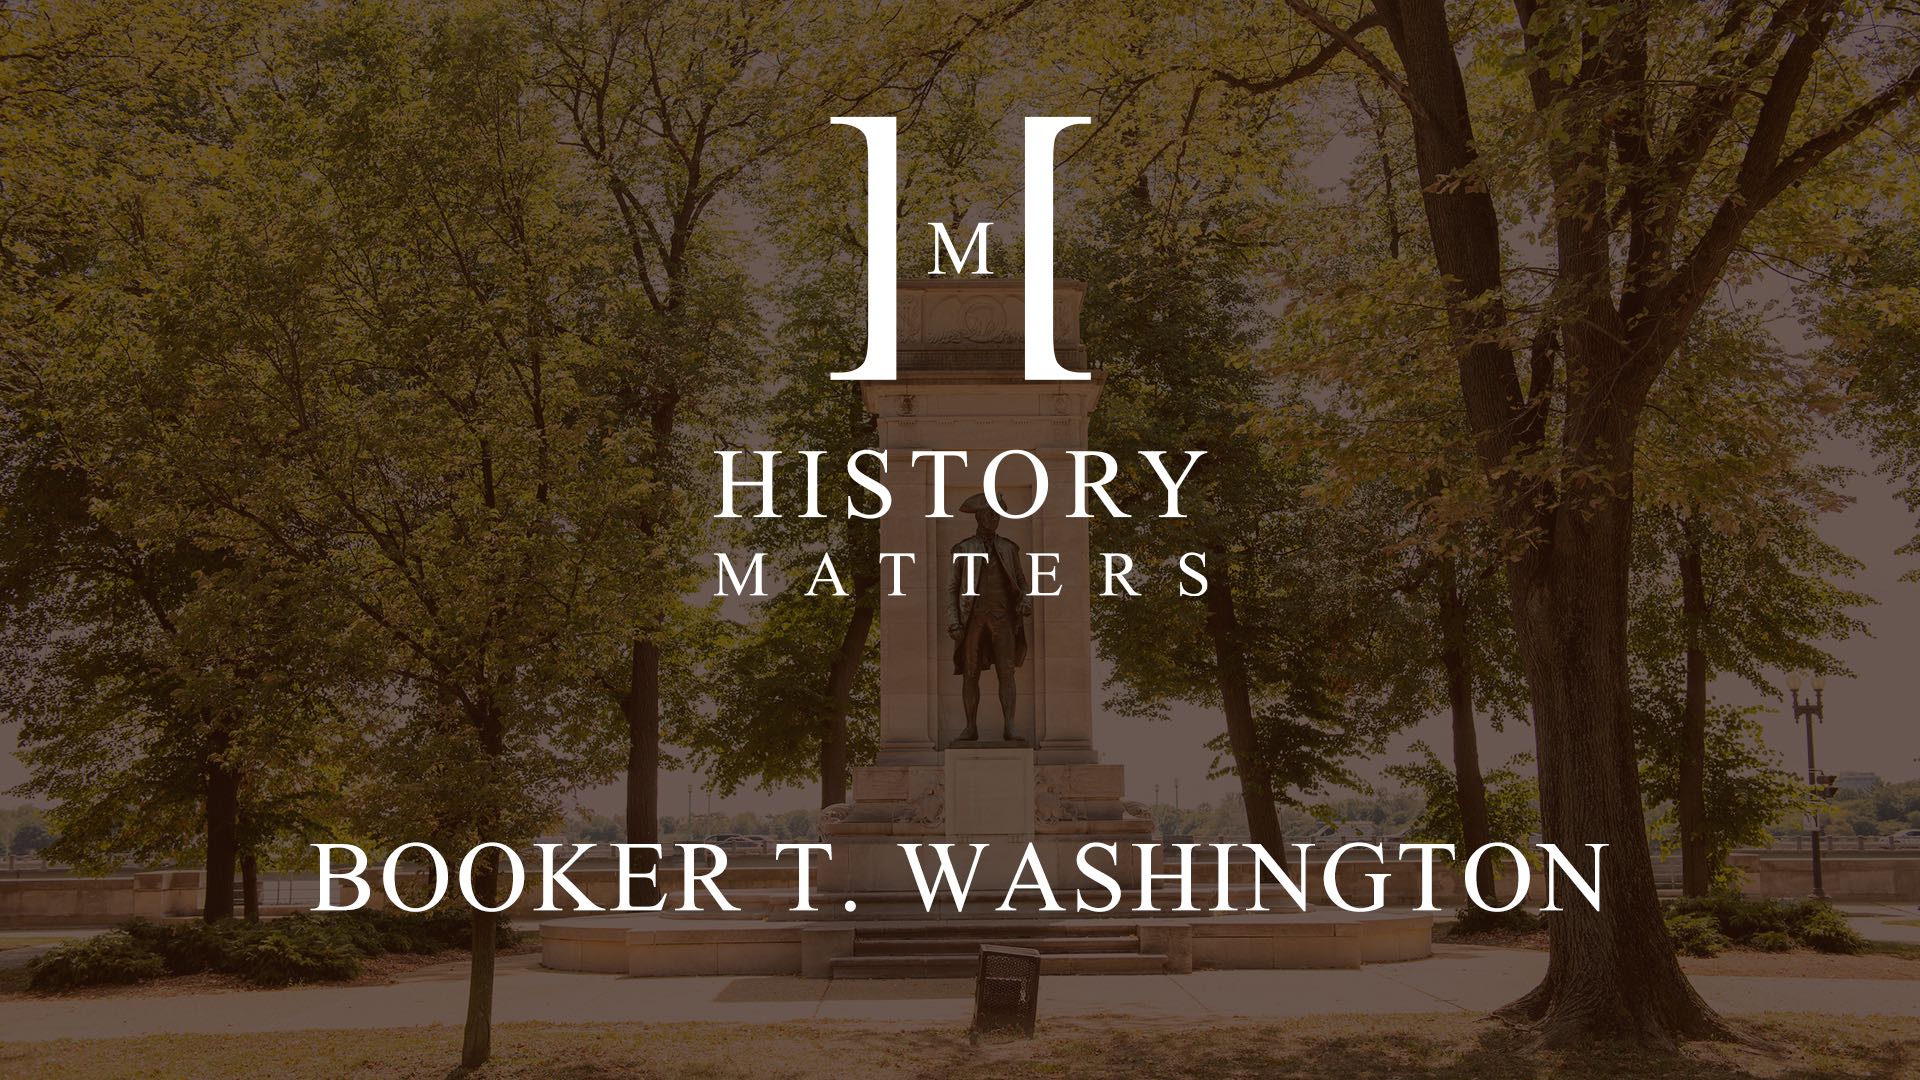 History Matters Booker T. Washington by Laurie Menekou with background of an old monument in a park